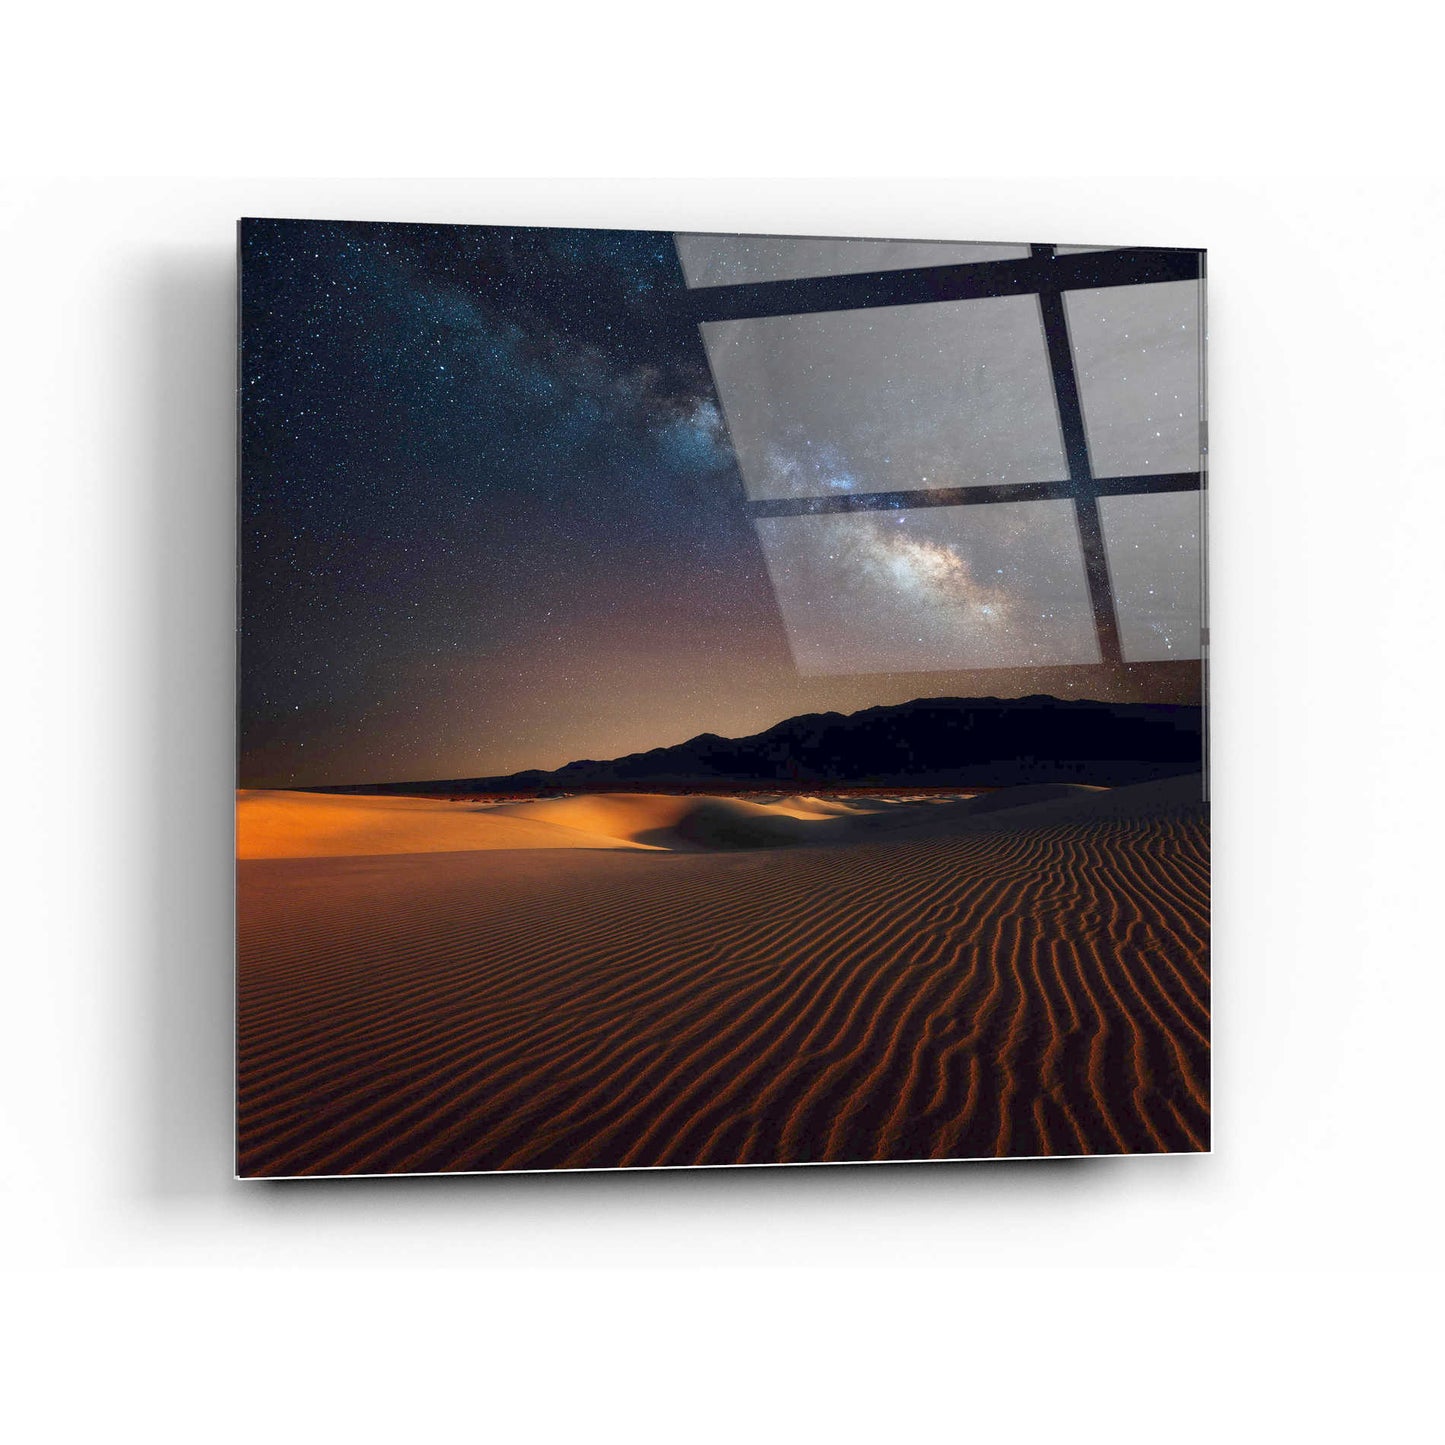 Epic Art "Milky Way Over Mesquite Dunes" by Darren White, Acrylic Glass Wall Art,24x24